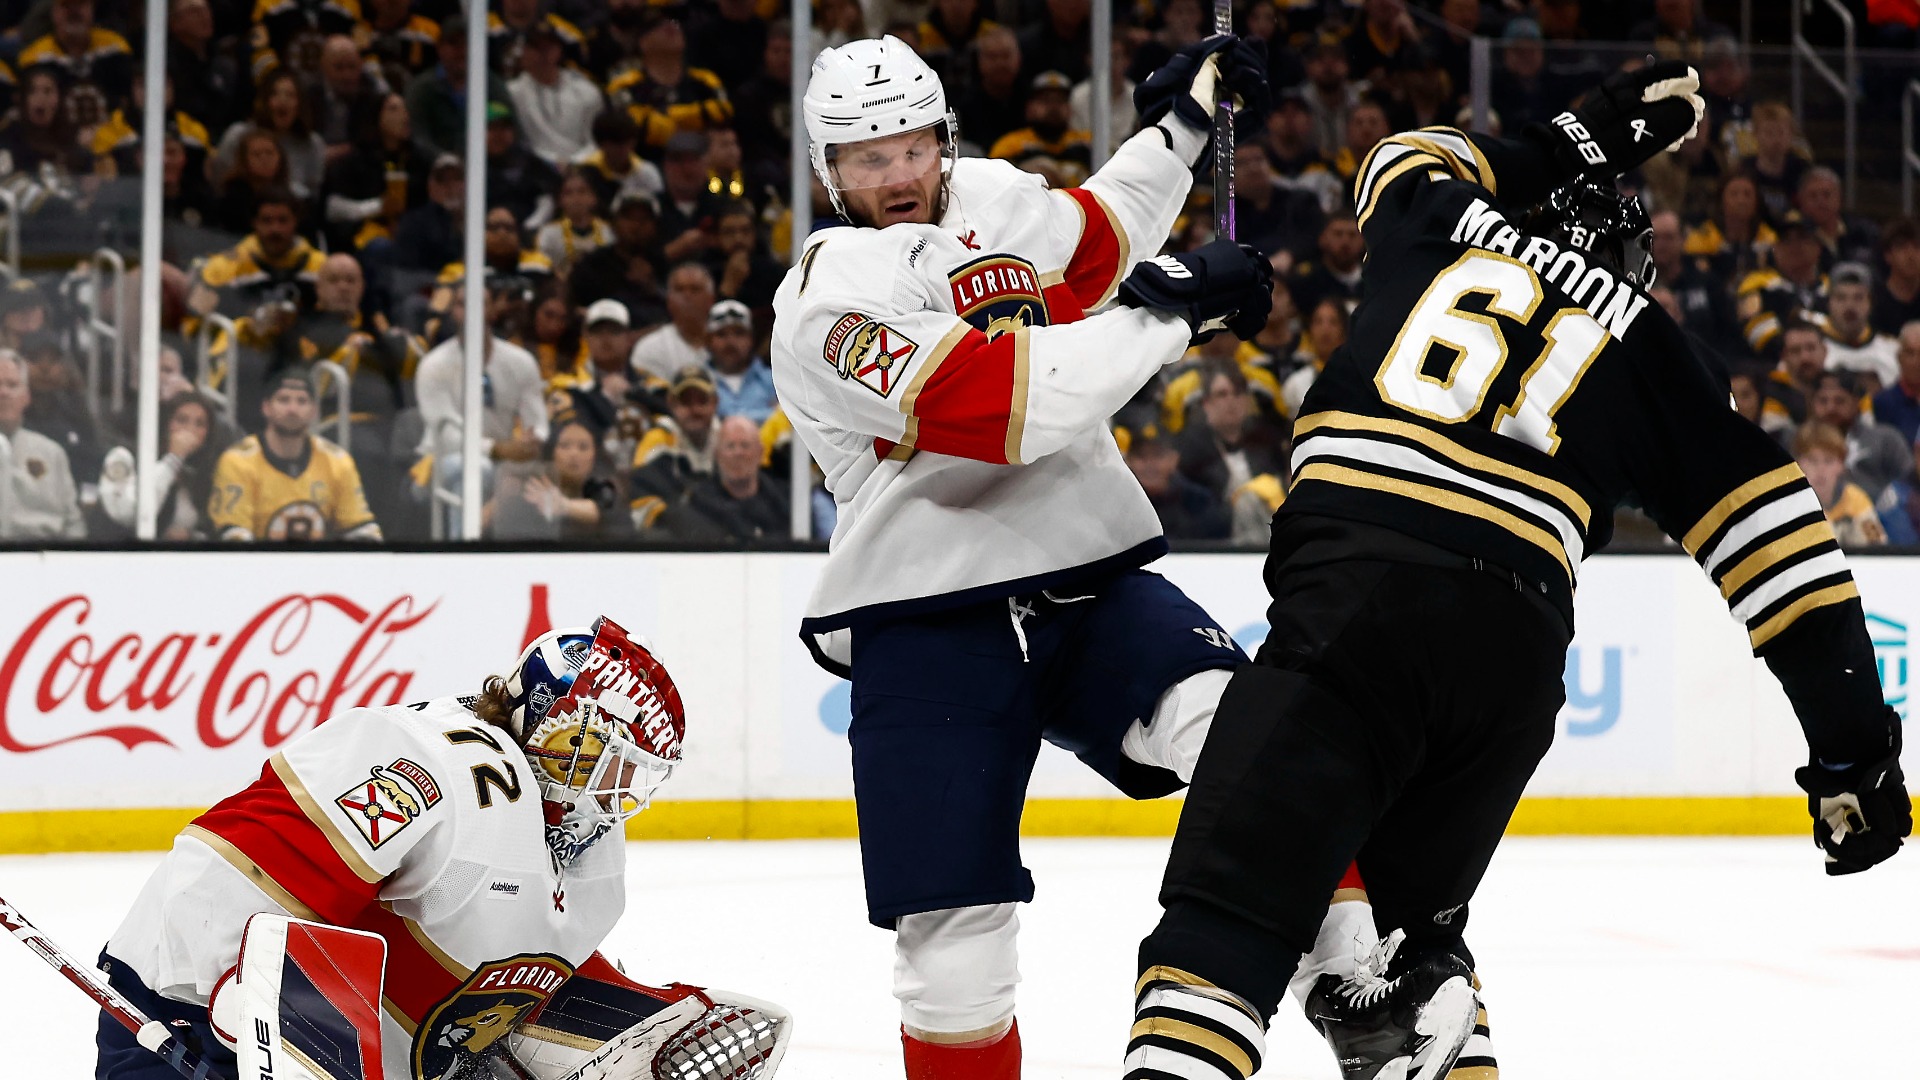 Bruins’ Charlie McAvoy, Pat Maroon Set Tone Early In Game 4 Vs.
Panthers